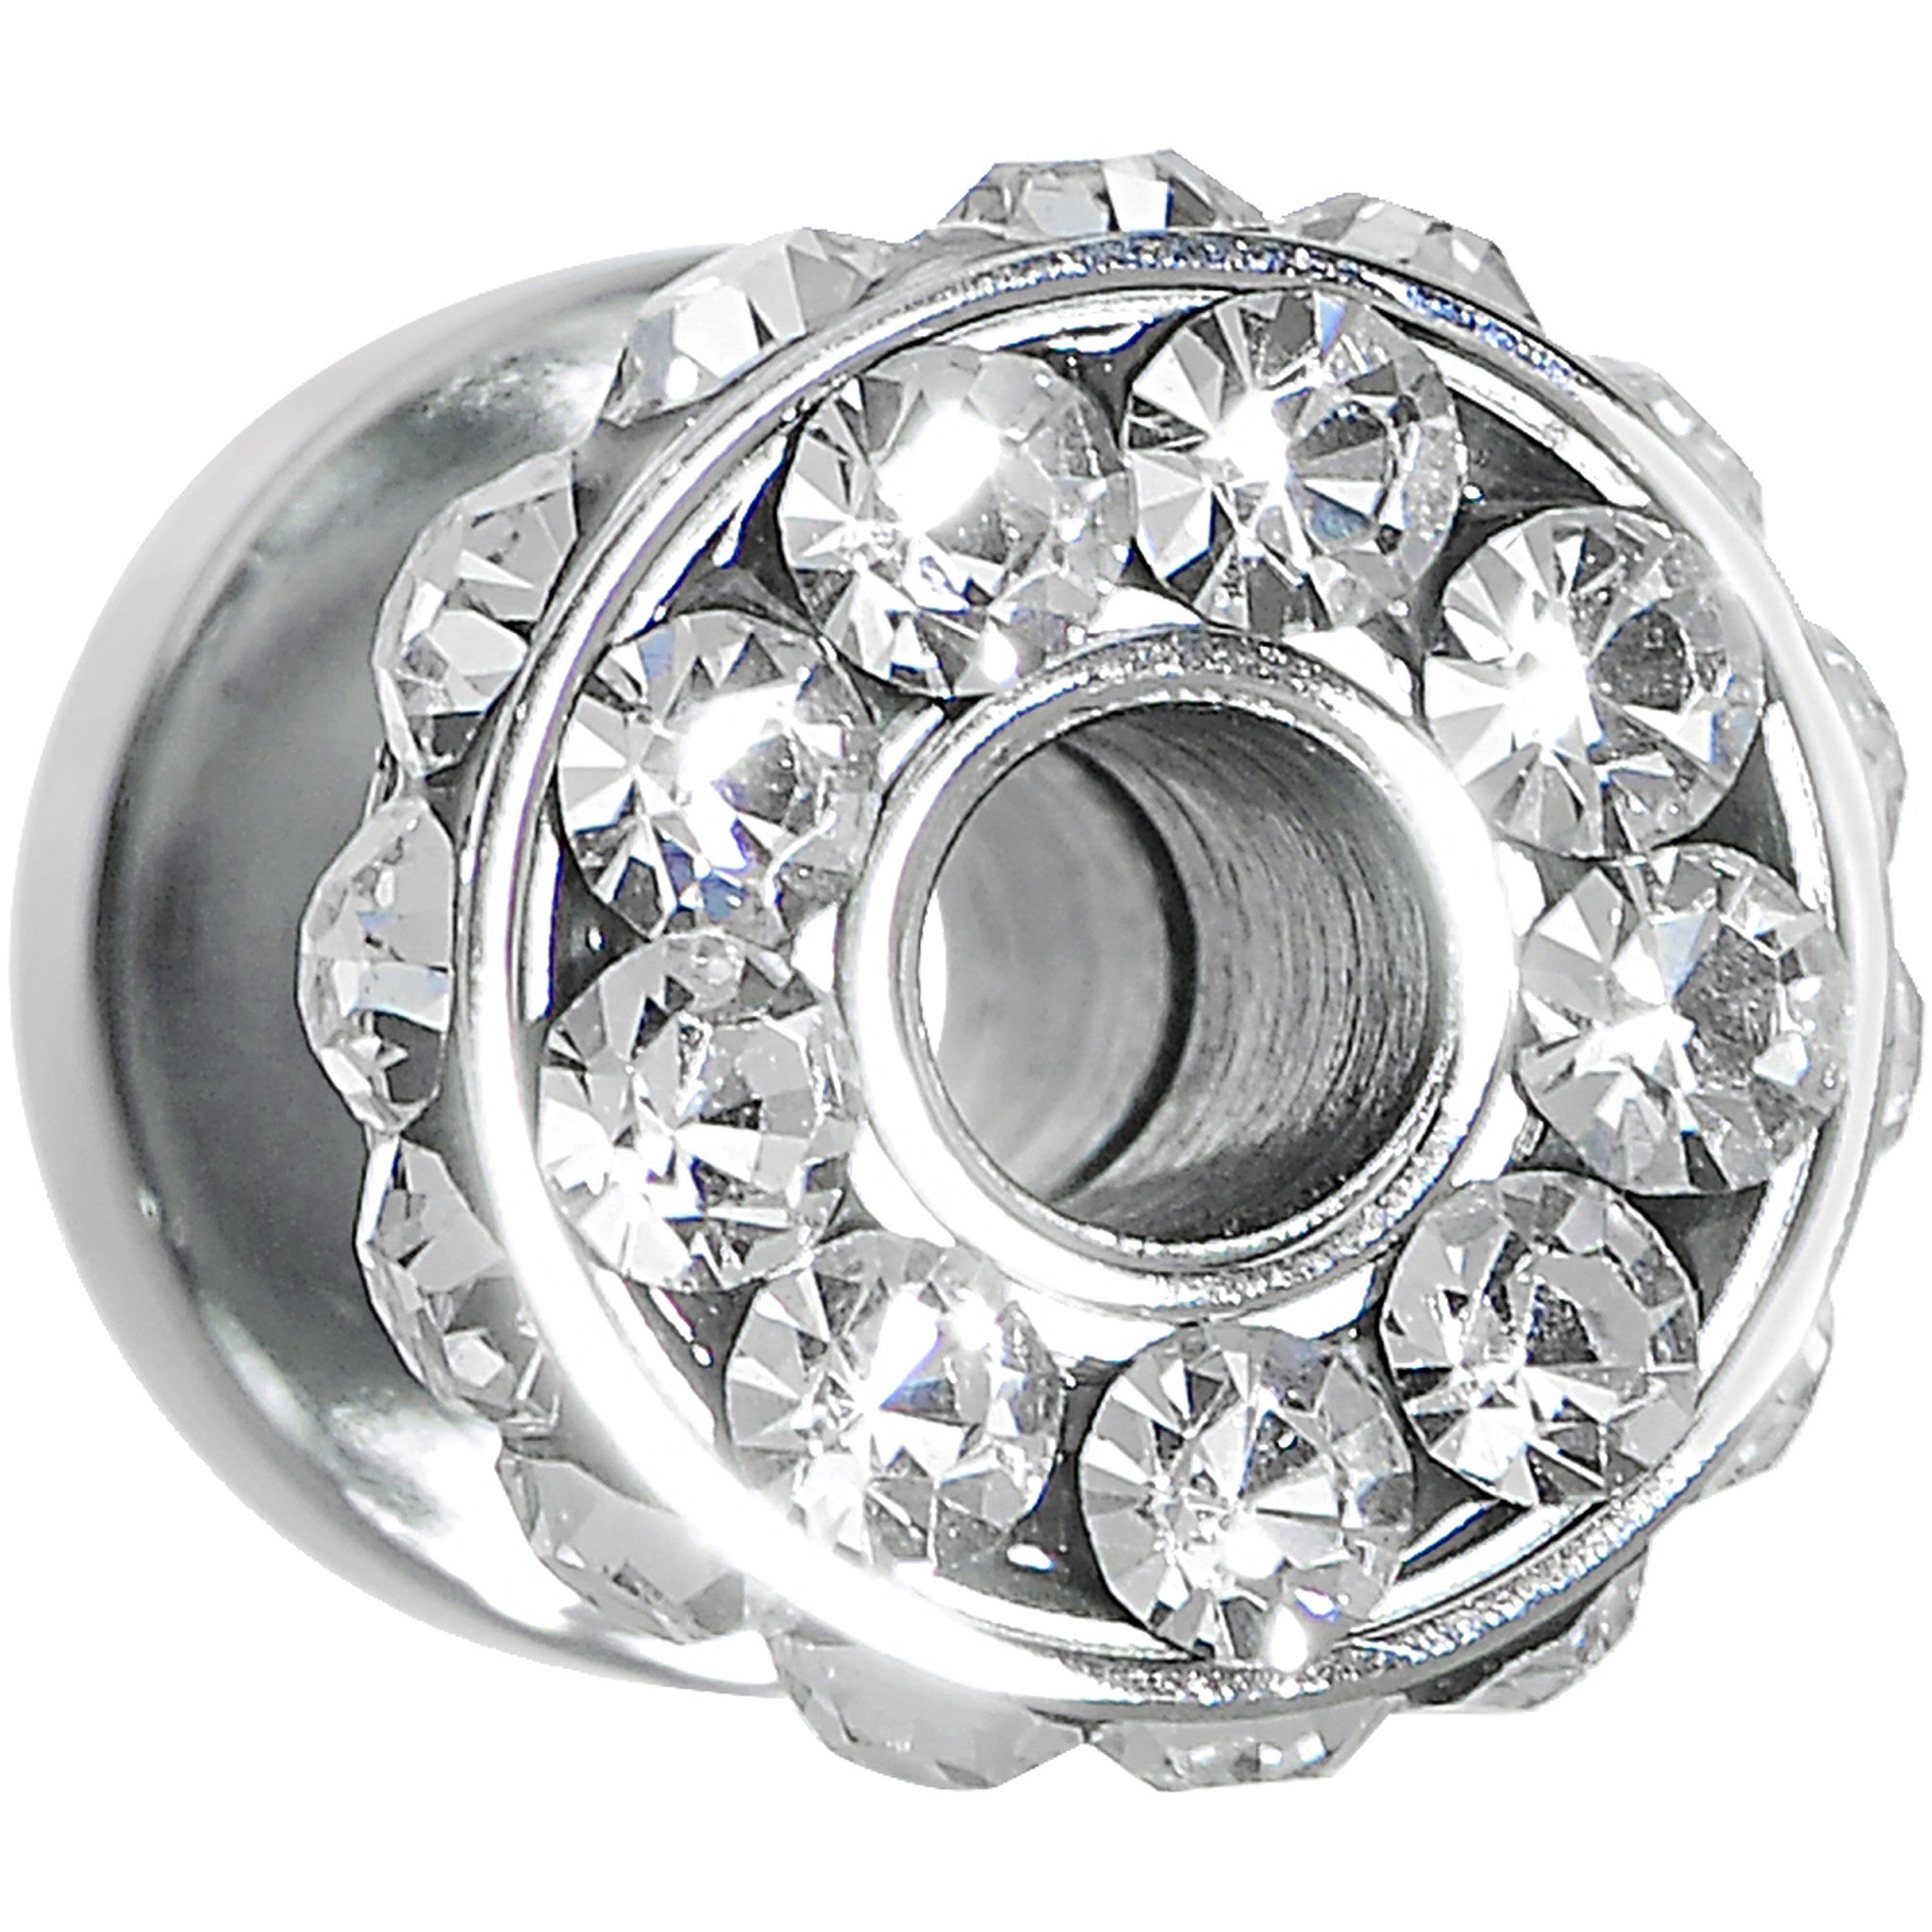 4 Gauge Clear Gem Stainless Steel Double Bling Screw Fit Tunnel Plug